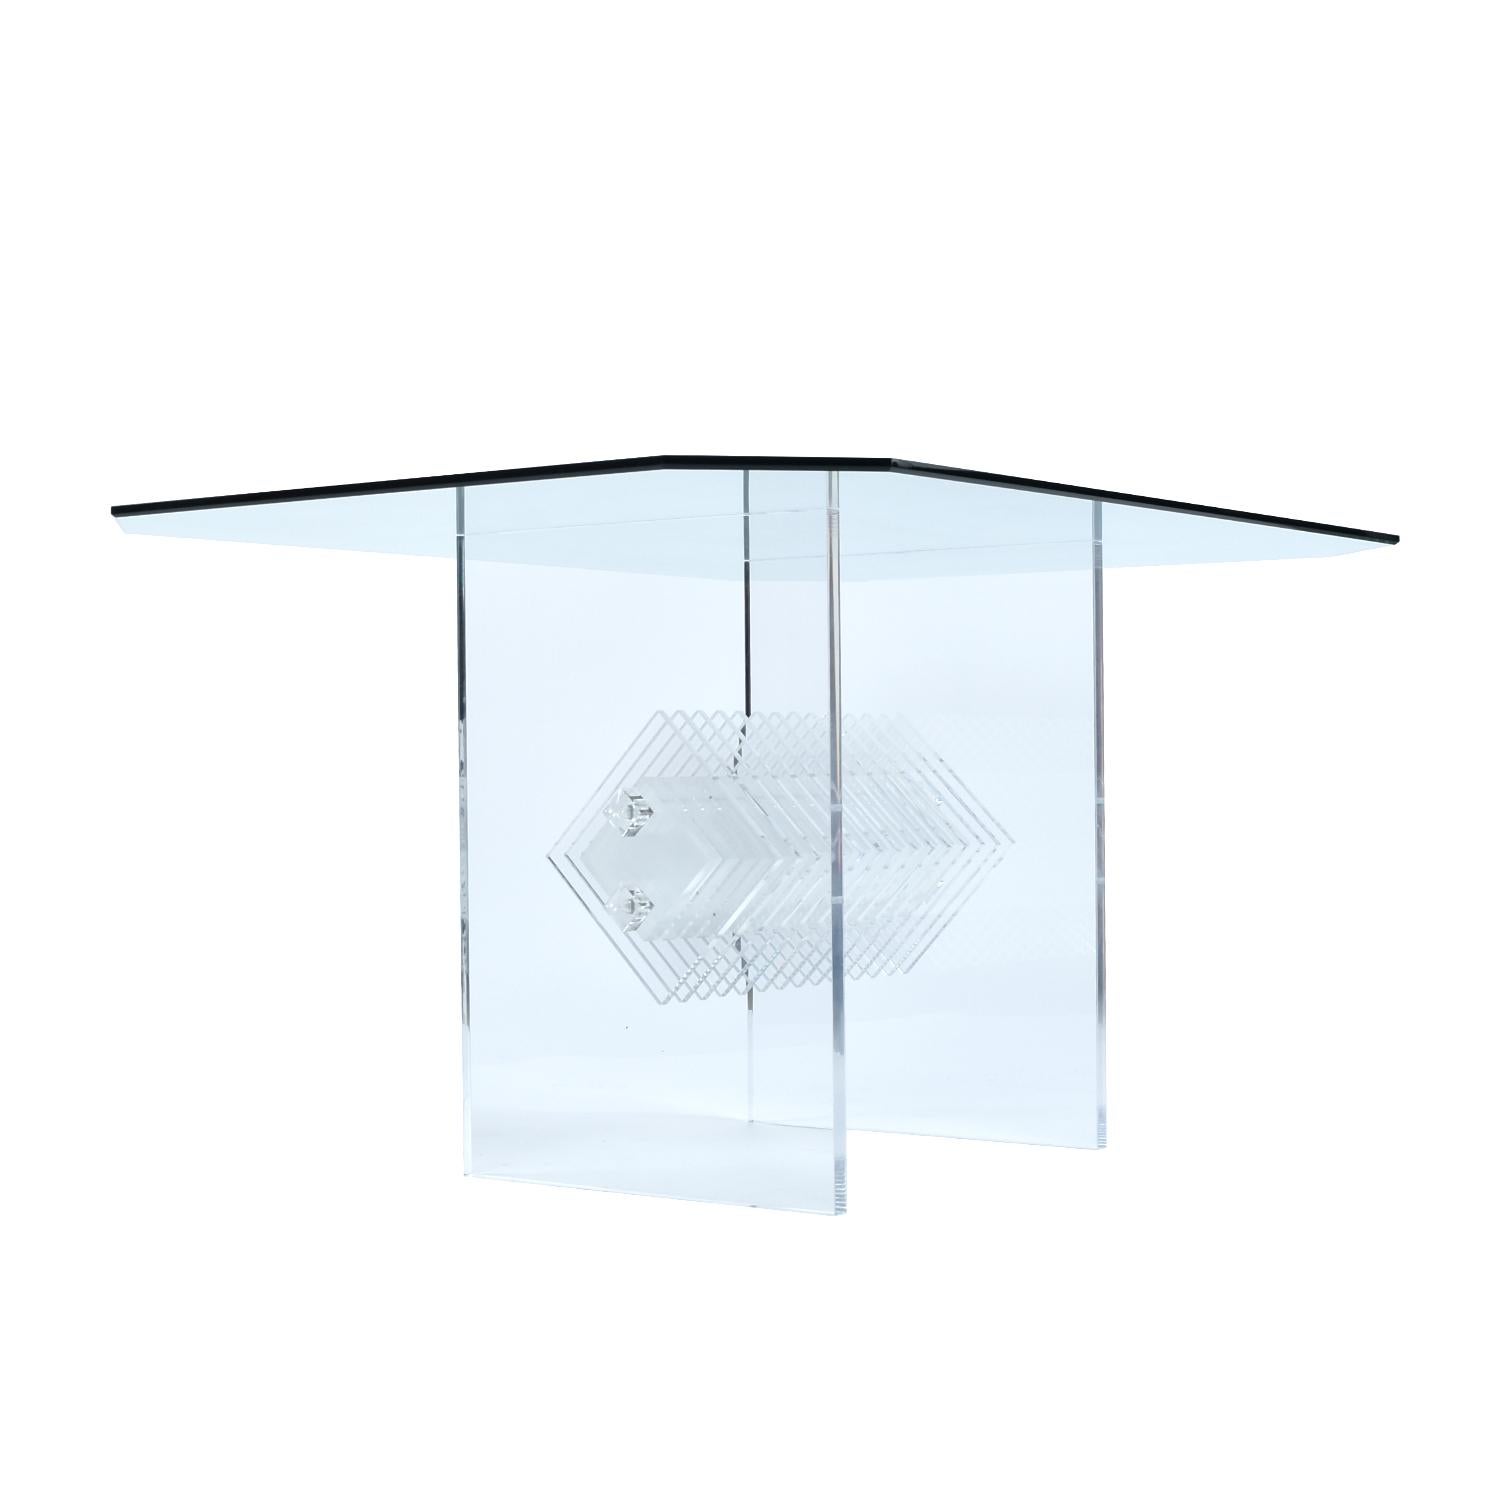 The clear acrylic diamond prism center sparkles like a gem! It’s this magical transparent quality that makes Lucite so desirable. The diamond prism perfectly captures the dynamic optics of Lucite. Place this table in front of a large window or